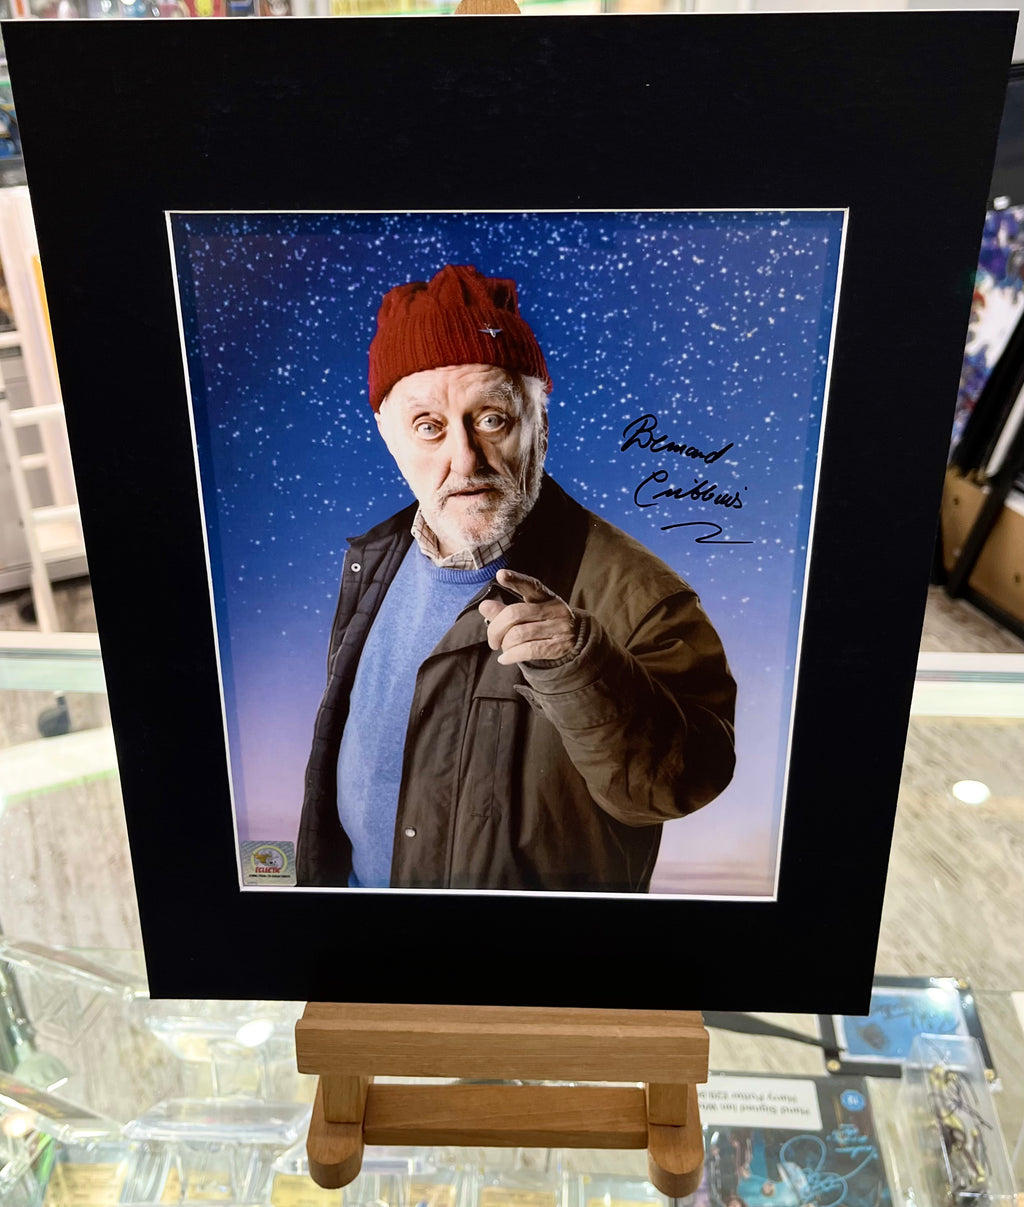 Doctor Who Bernard Cribbins Autographed Photograph with Eclectic Double Layer Authenticity